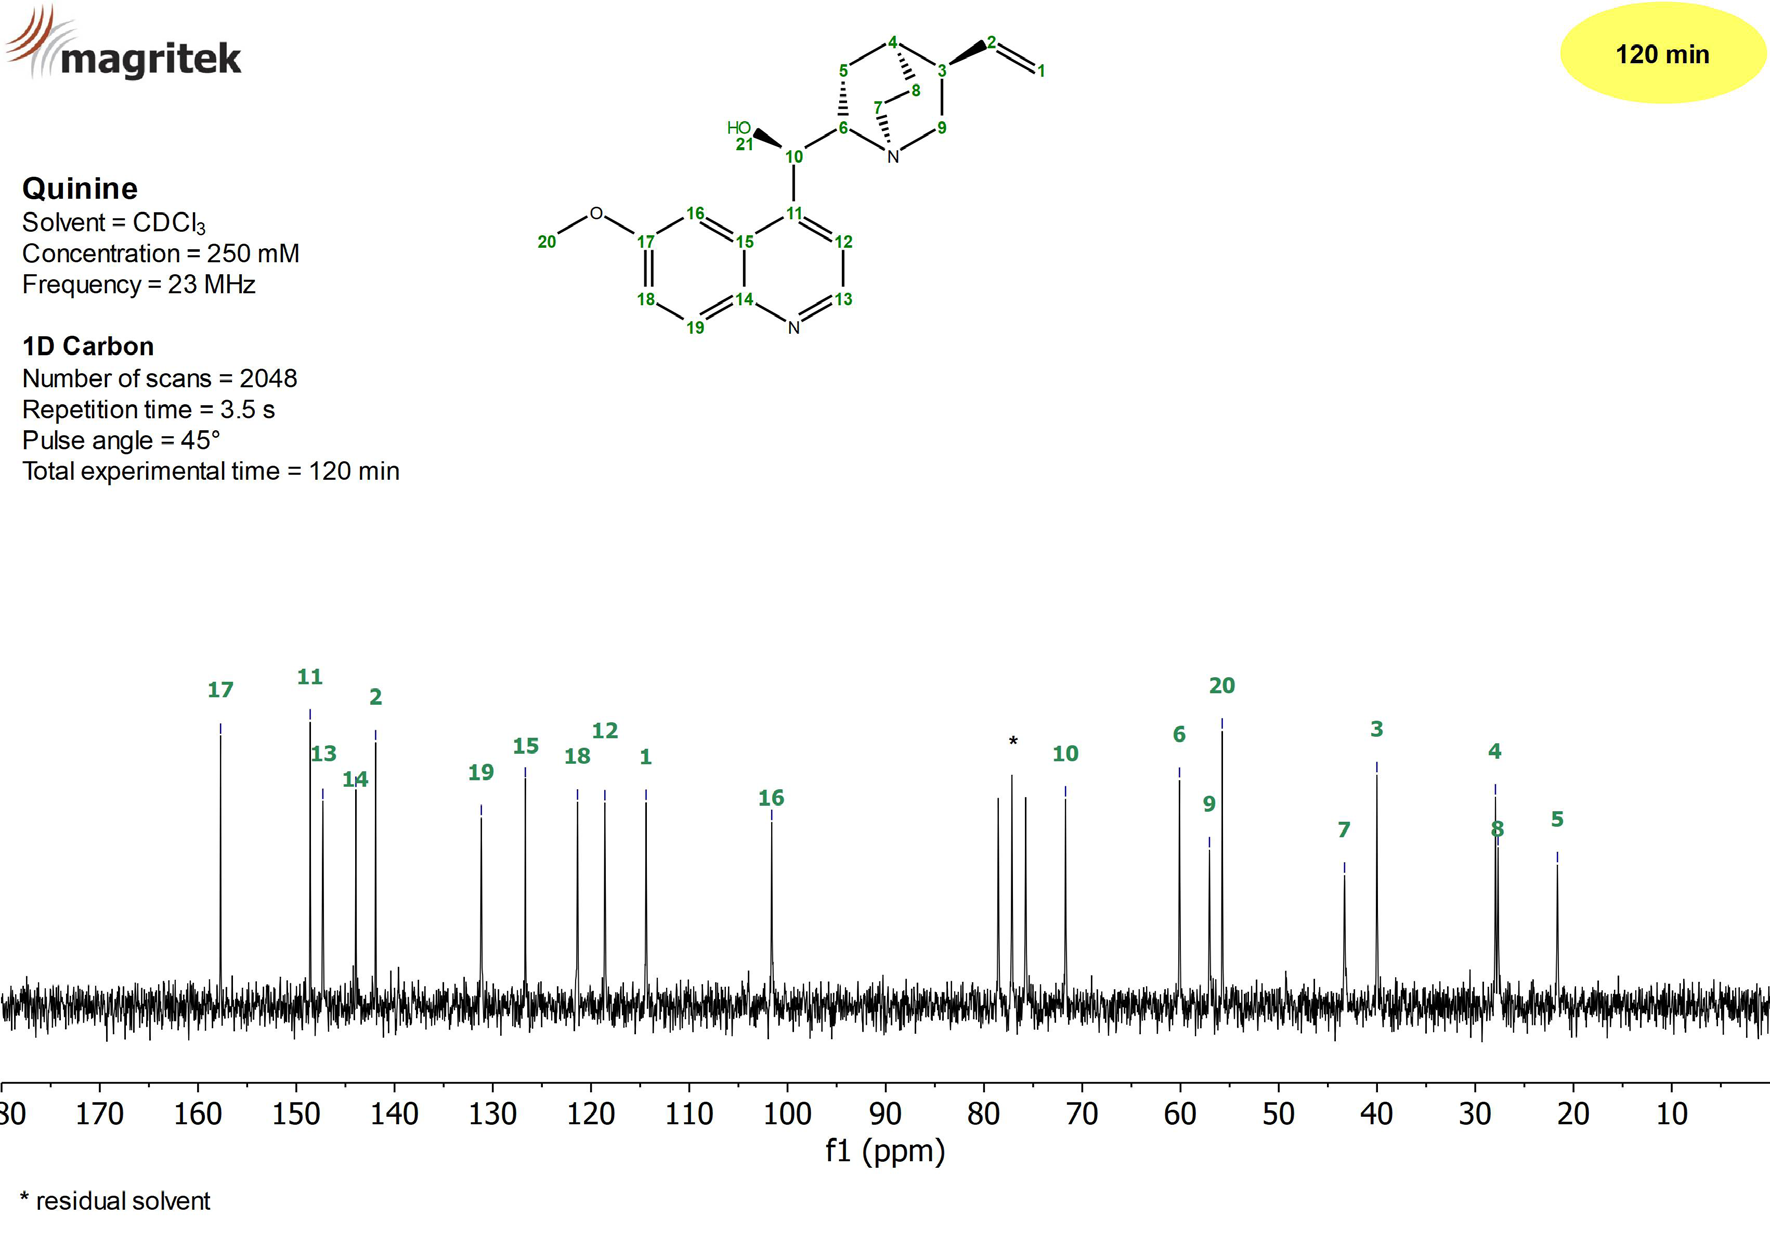 13C NMR spectrum of a 250 mM Quinine in CDCl3 measured on a Spinsolve 90 MHz system in 120 minutes.